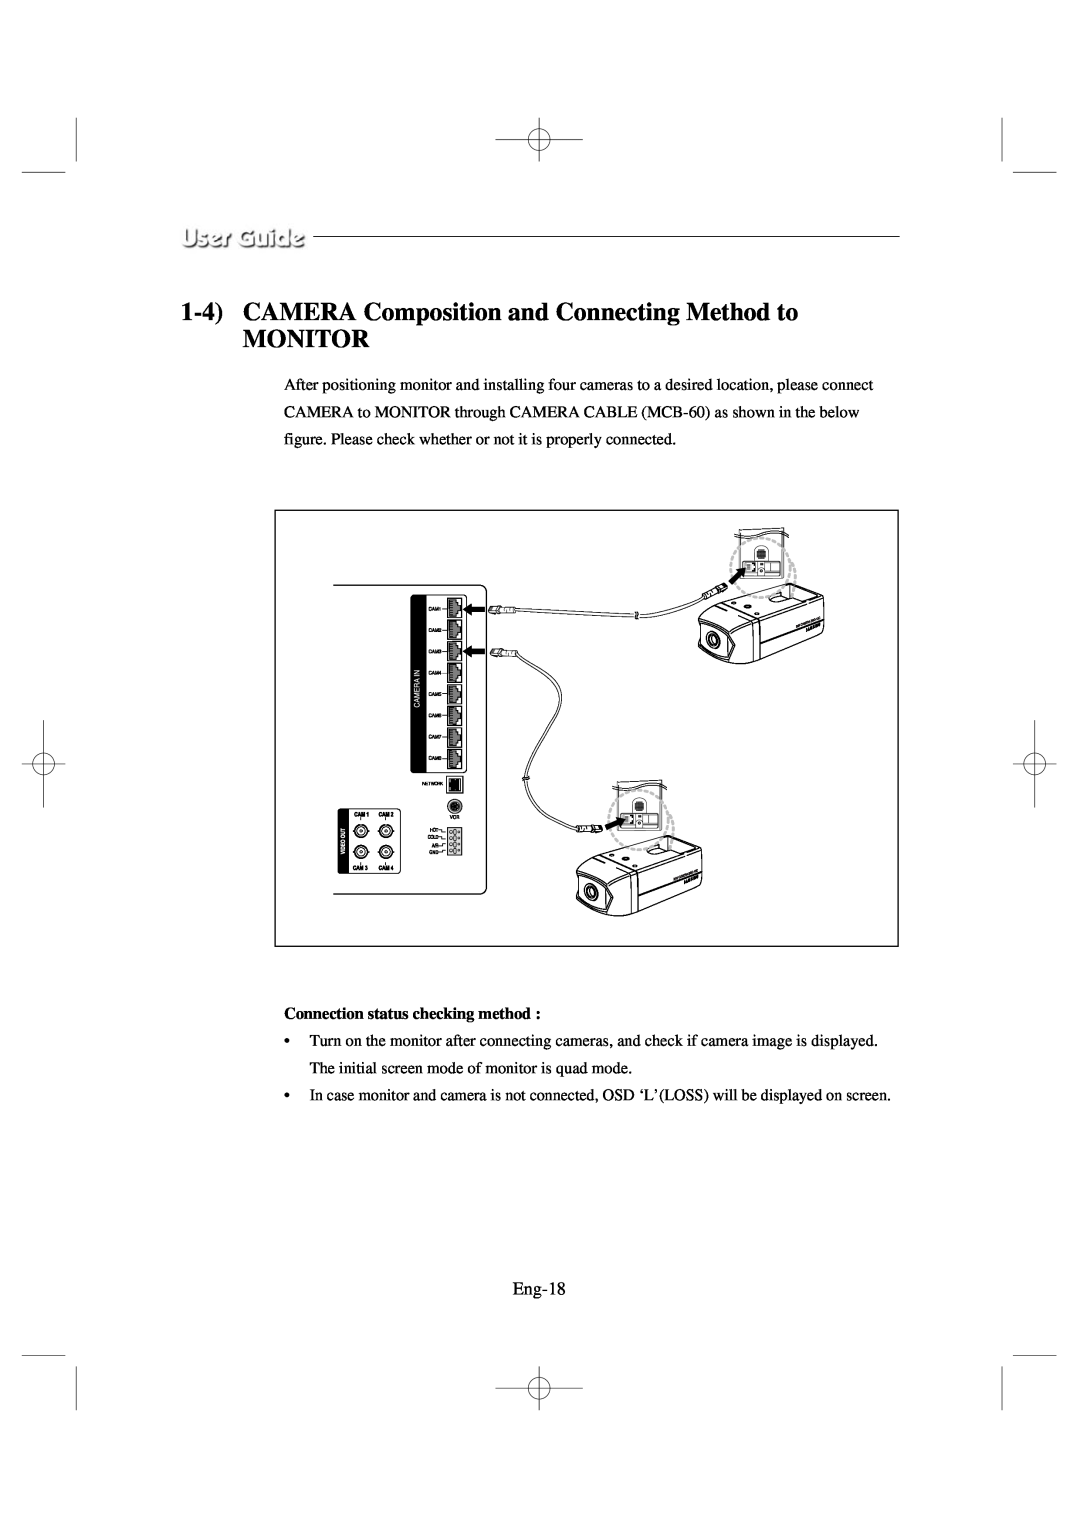 Samsung SSC17WEB manual 1-4CAMERA Composition and Connecting Method to, Monitor, Eng-18, Connection status checking method 